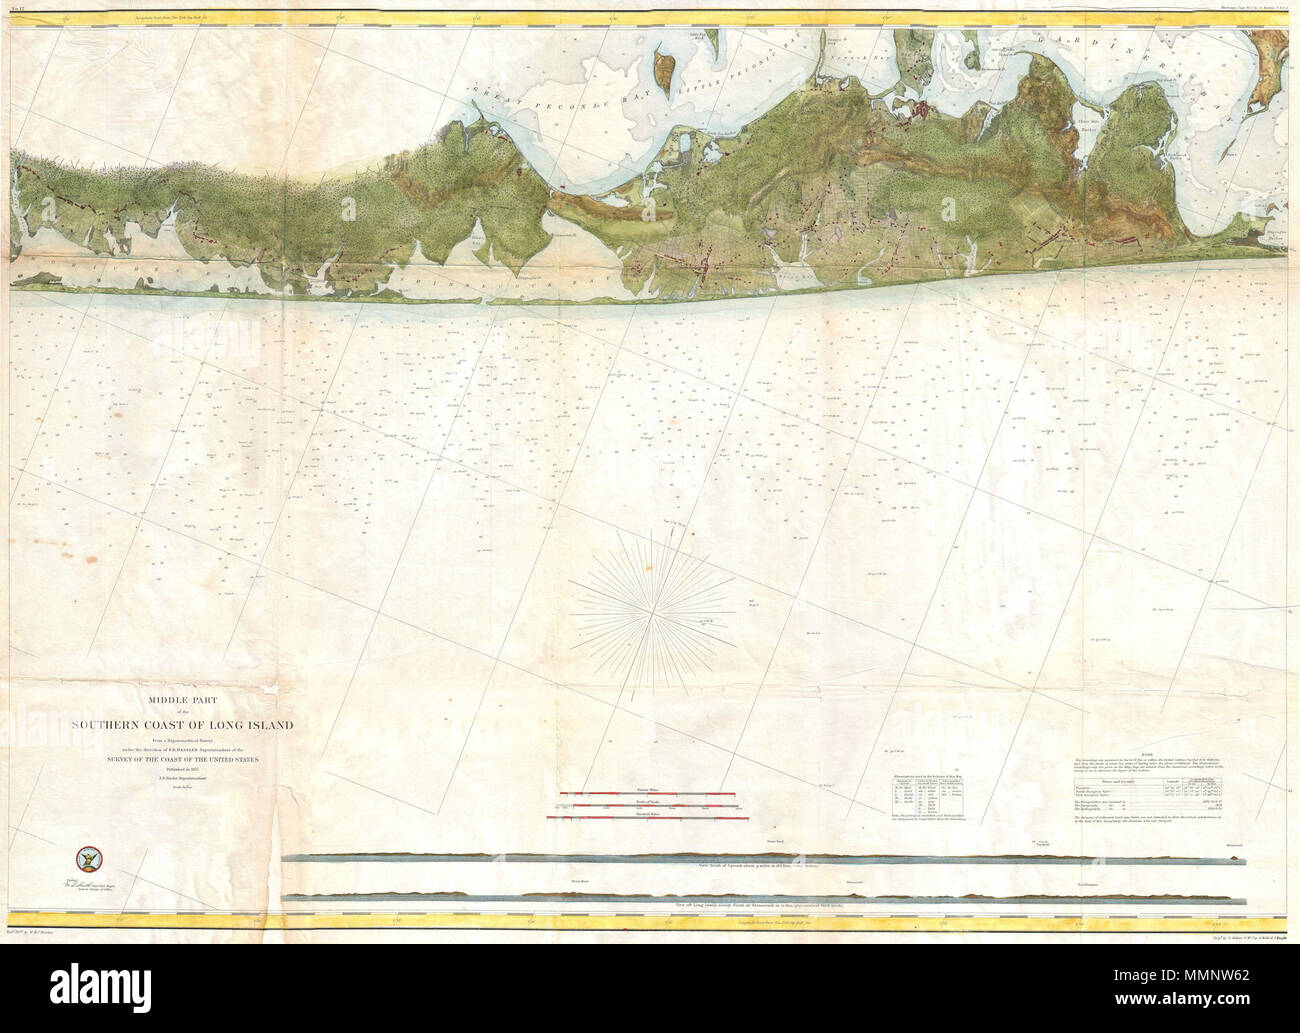 .  English: This is an extraordinary and extremely rare hand colored large format 1857 U.S. Coast Survey sea chart or map depicting southeastern Long Island, New York. Details part of Suffolk County from Moriches Bay to Napeague Harbor, including the summer getaways of Sag Harbor, East Hampton, Southampton (South Hampton), Quogue, Bridgehampton and Amagansett, among others. Extends as far north as Gardiner’s Island and Hog Neck. Inland regions are depicted in considerable detail, down to individual buildings. In addition to inland details, this chart contains a wealth of practical information  Stock Photo